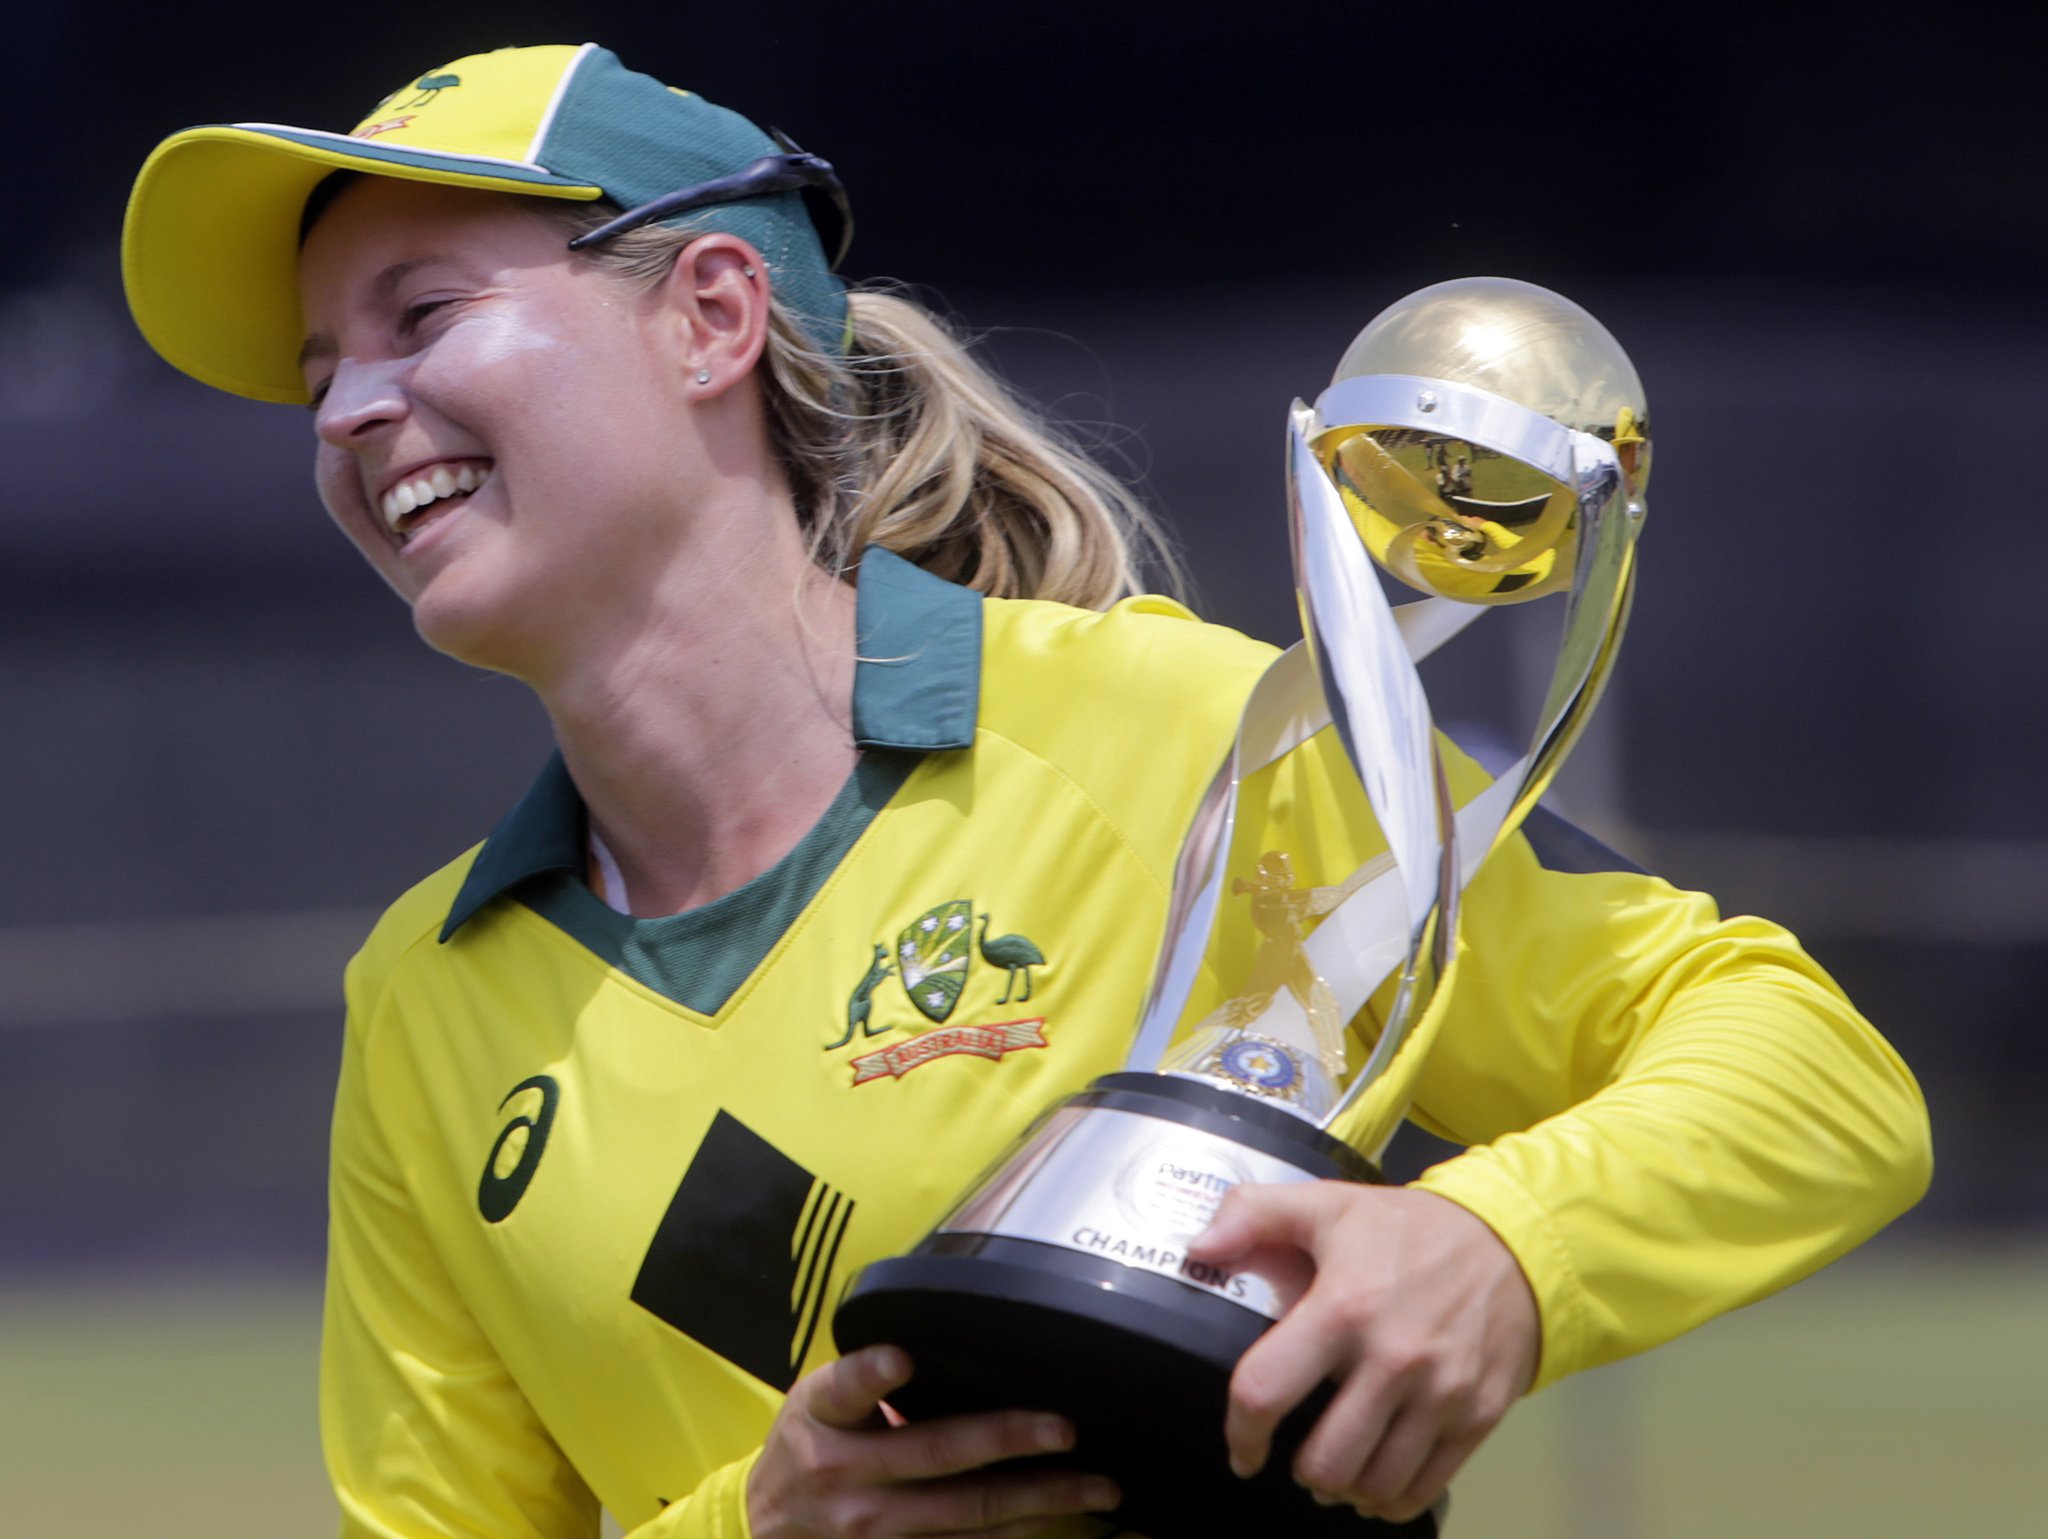 Meg Lanning Retires From International Cricket At The Age of 31, Leaves Cricket Fans In Shock!